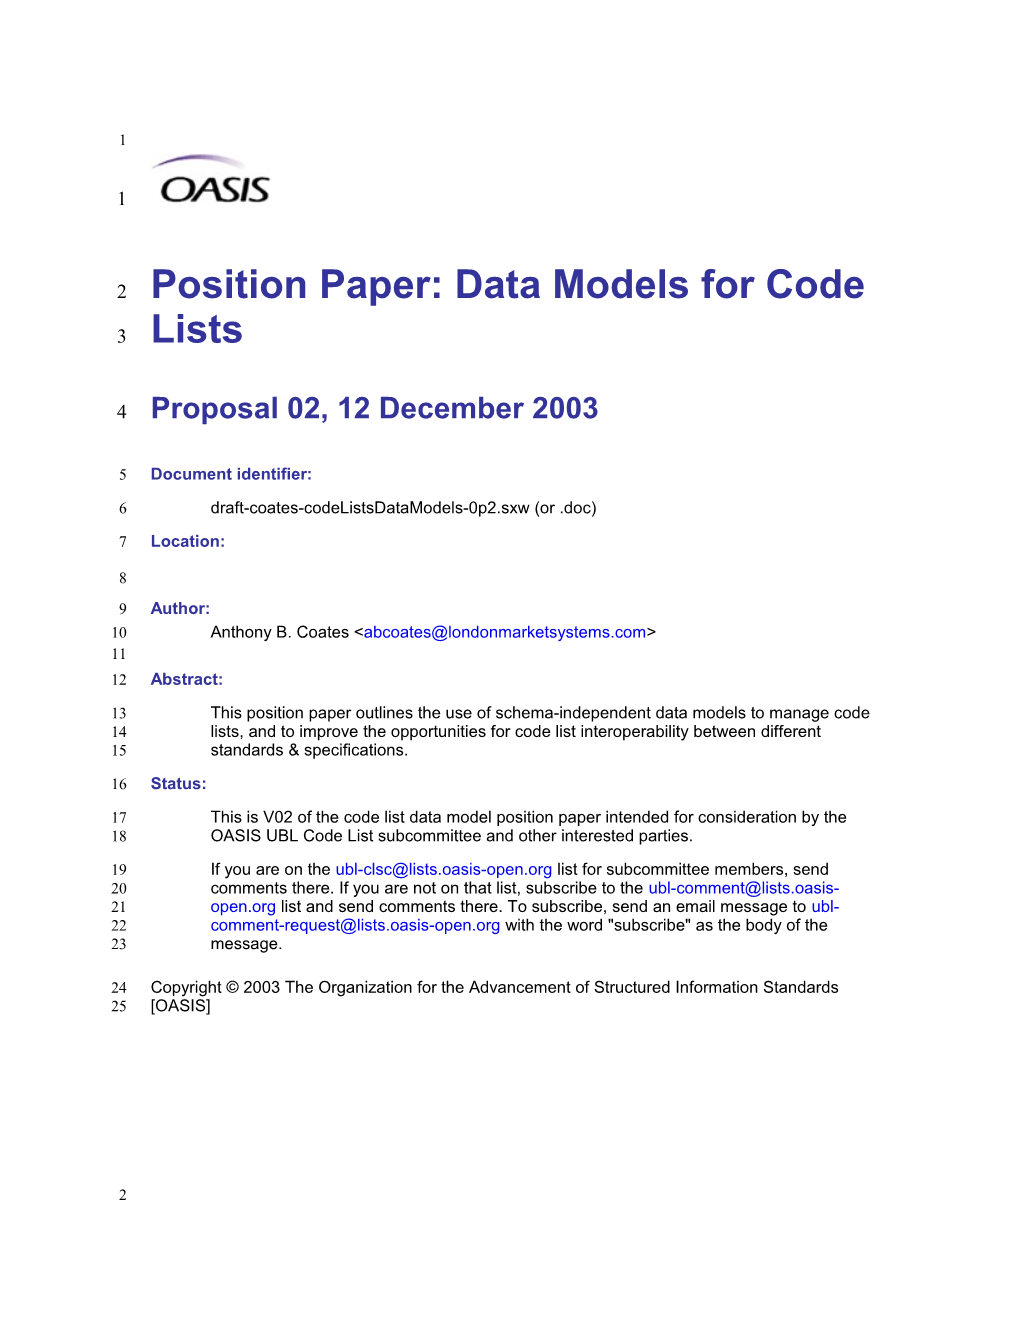 Position Paper: Data Models for Code Lists